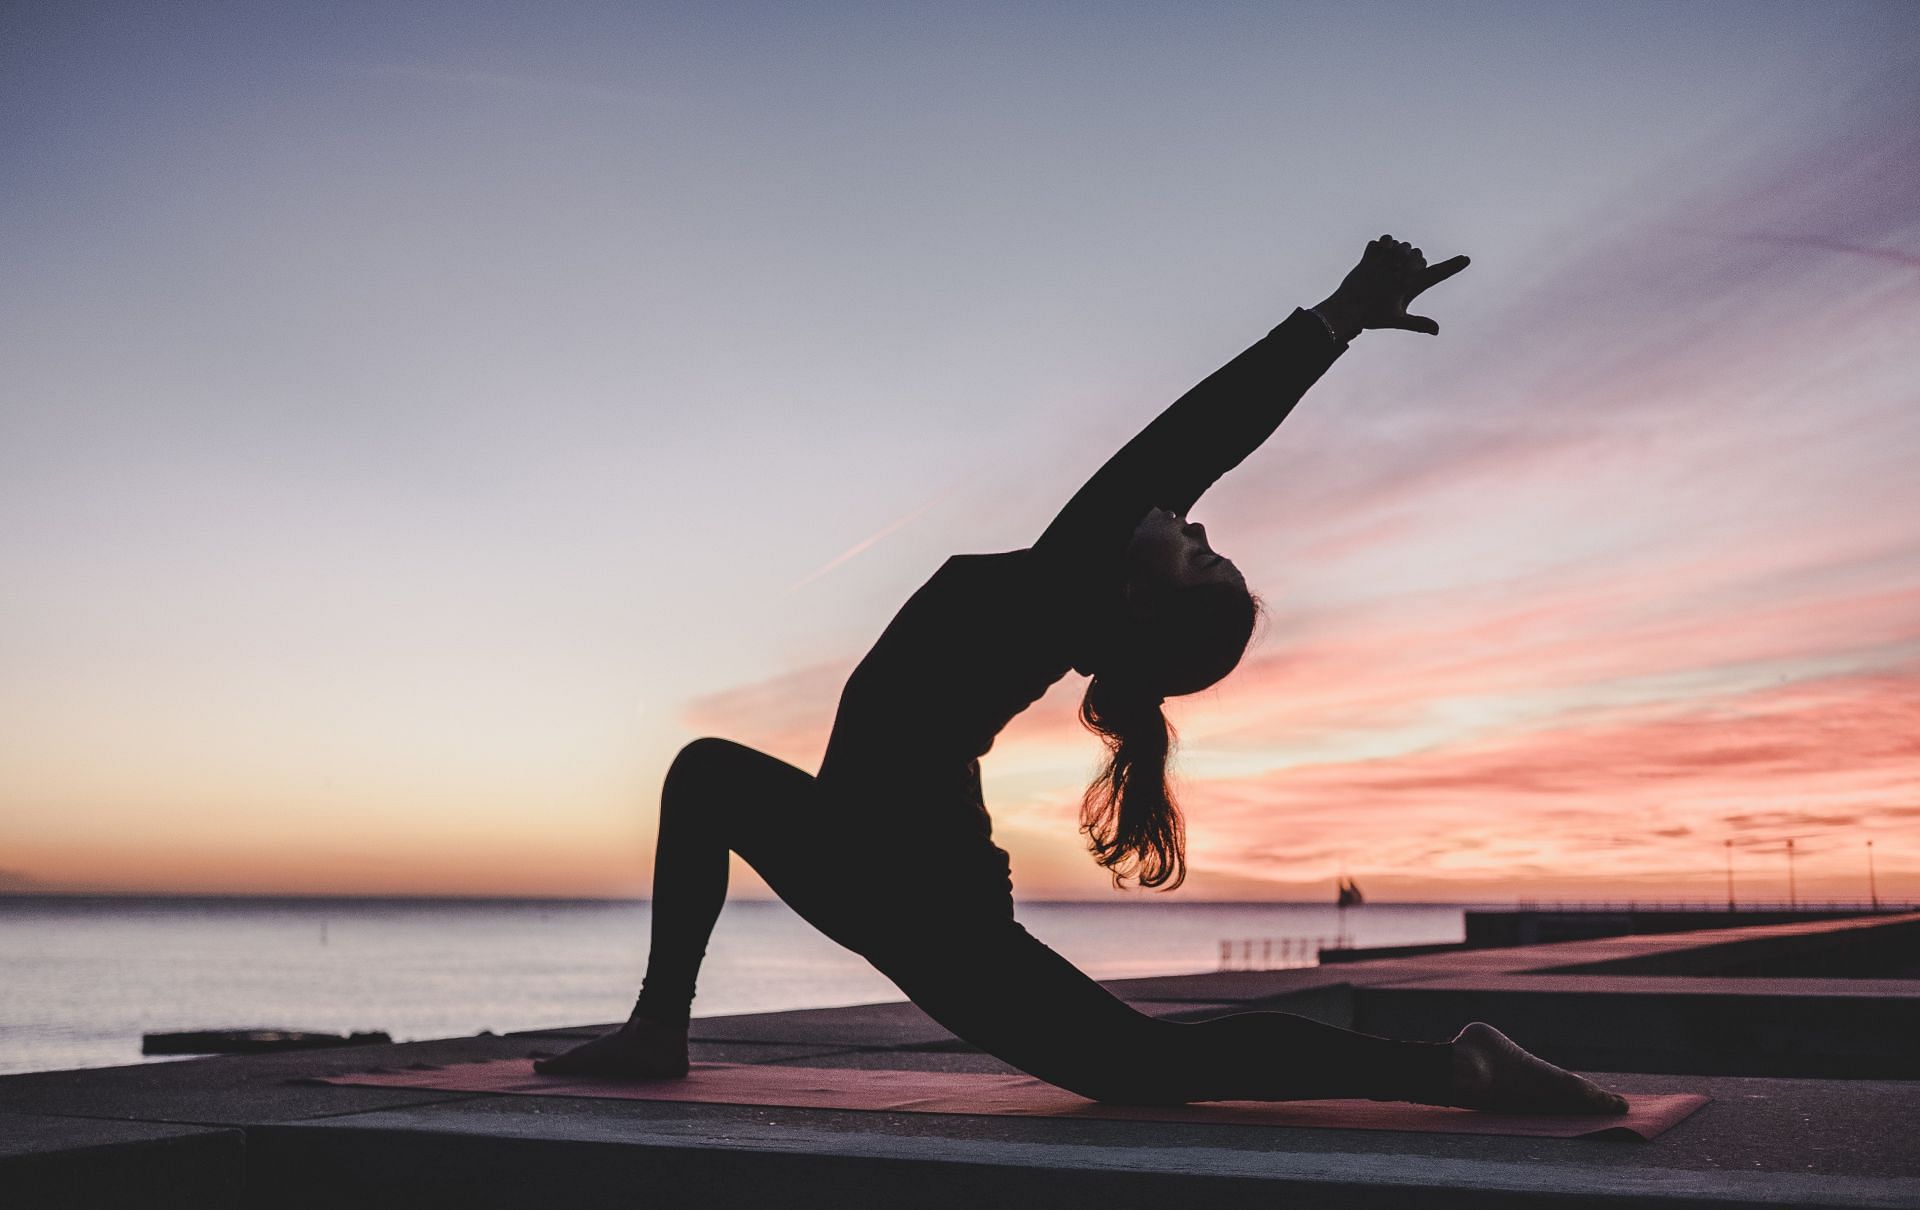 Simple yoga poses can be a great way to stretch in the morning. (Image via Unsplash / Kike Vega)